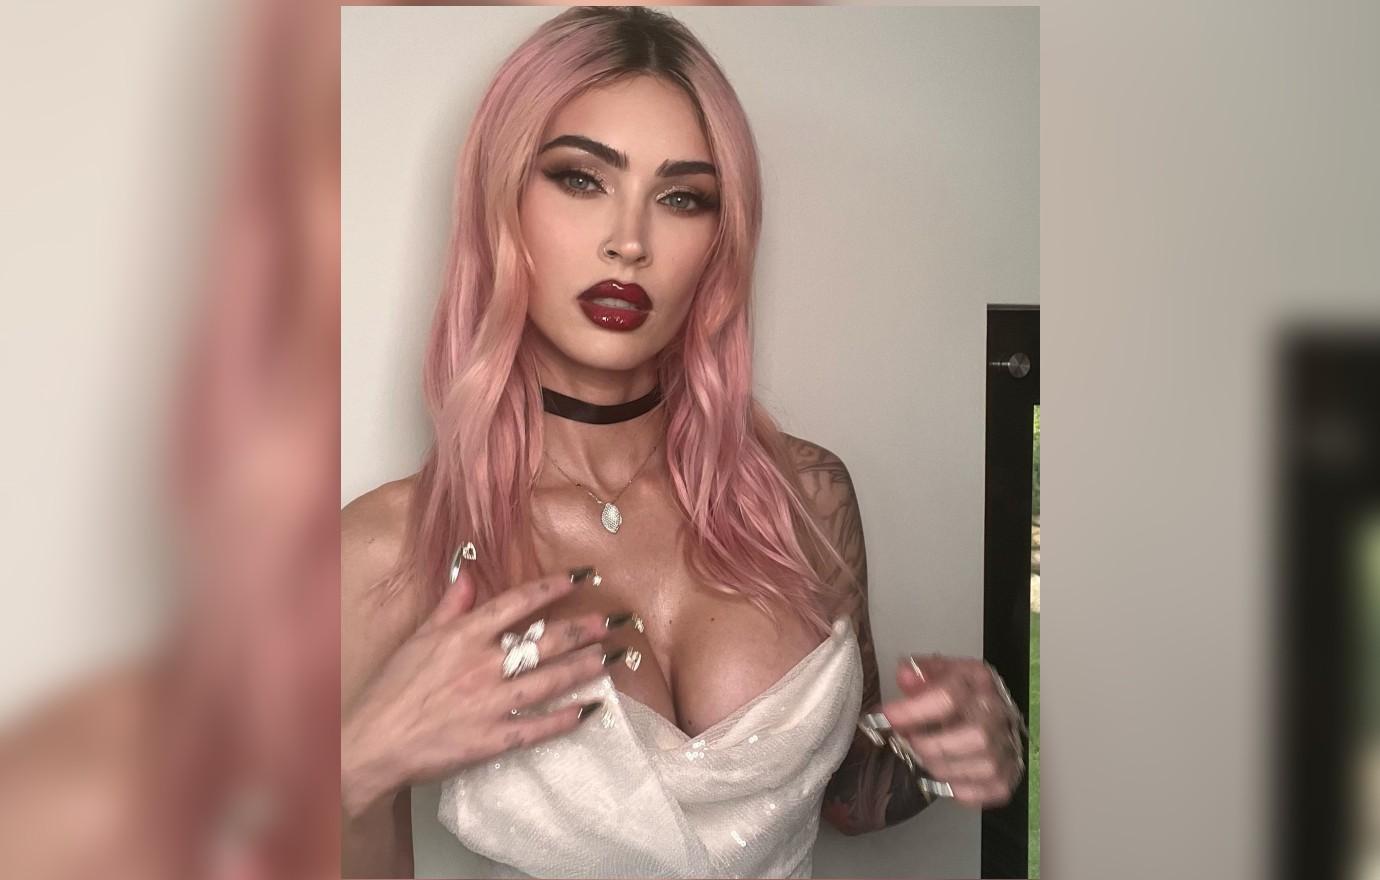 Ex 'Human Ken Doll' Jessica Alves's friend kisses her boobs as they put on  raunchy display outside Milan restaurant